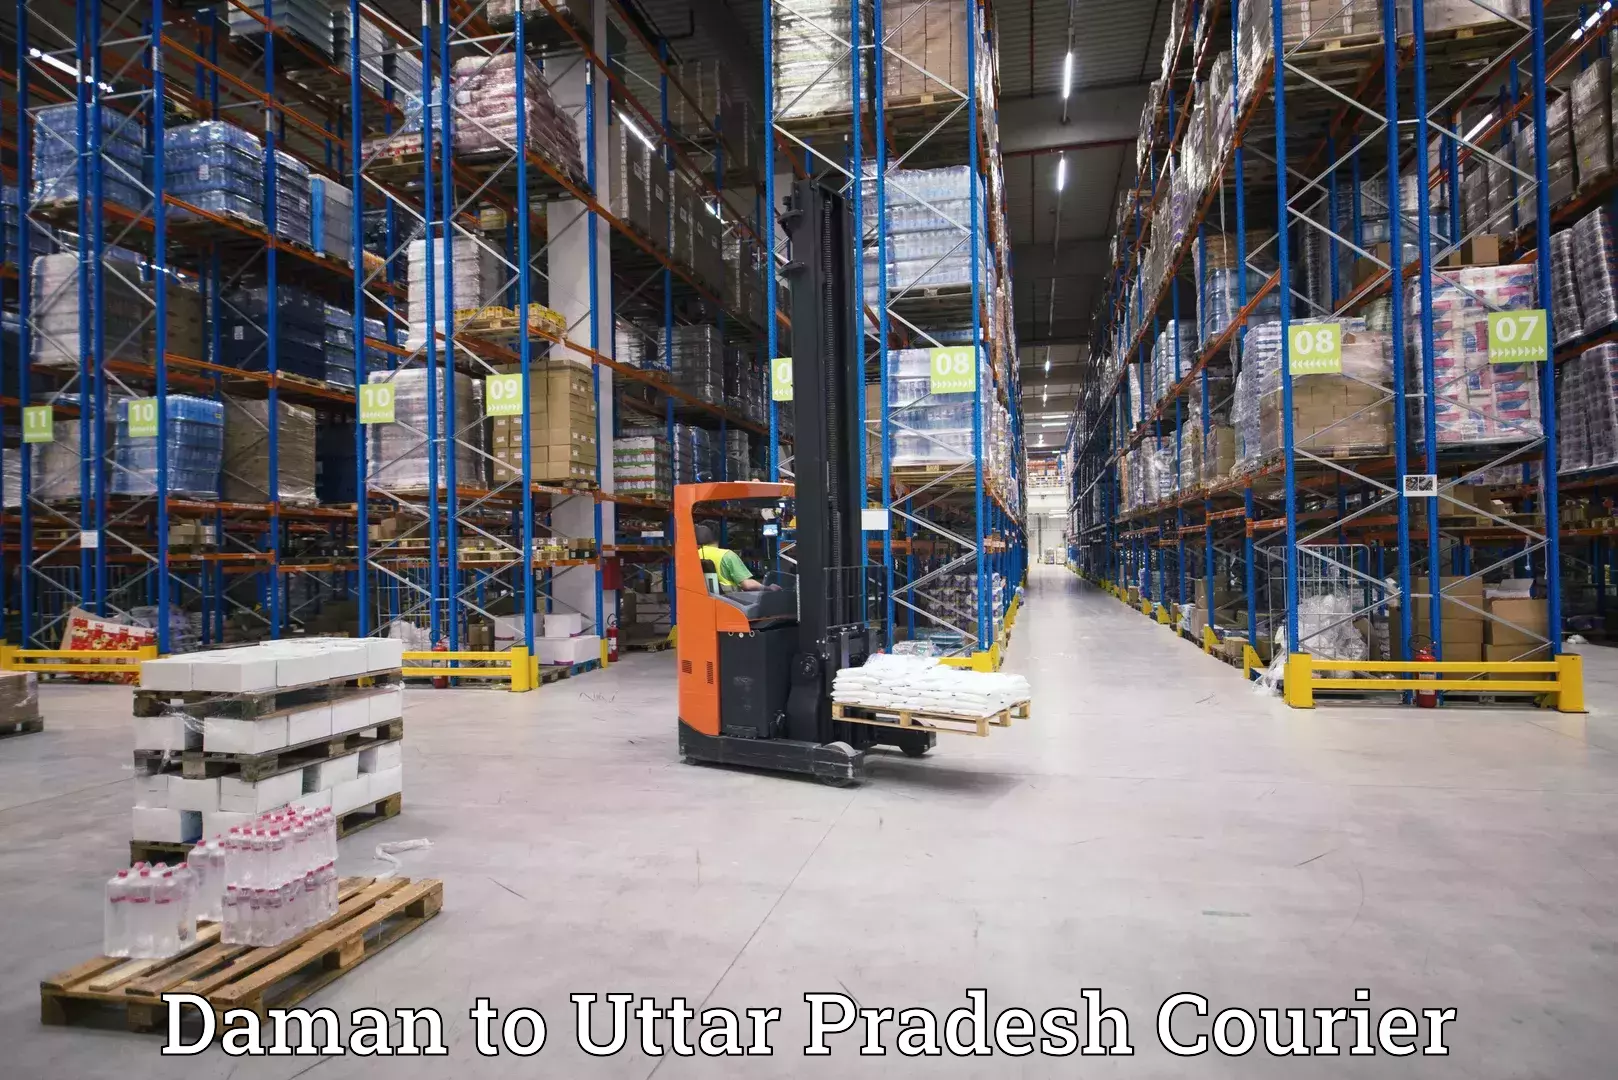 State-of-the-art courier technology Daman to Sitapur